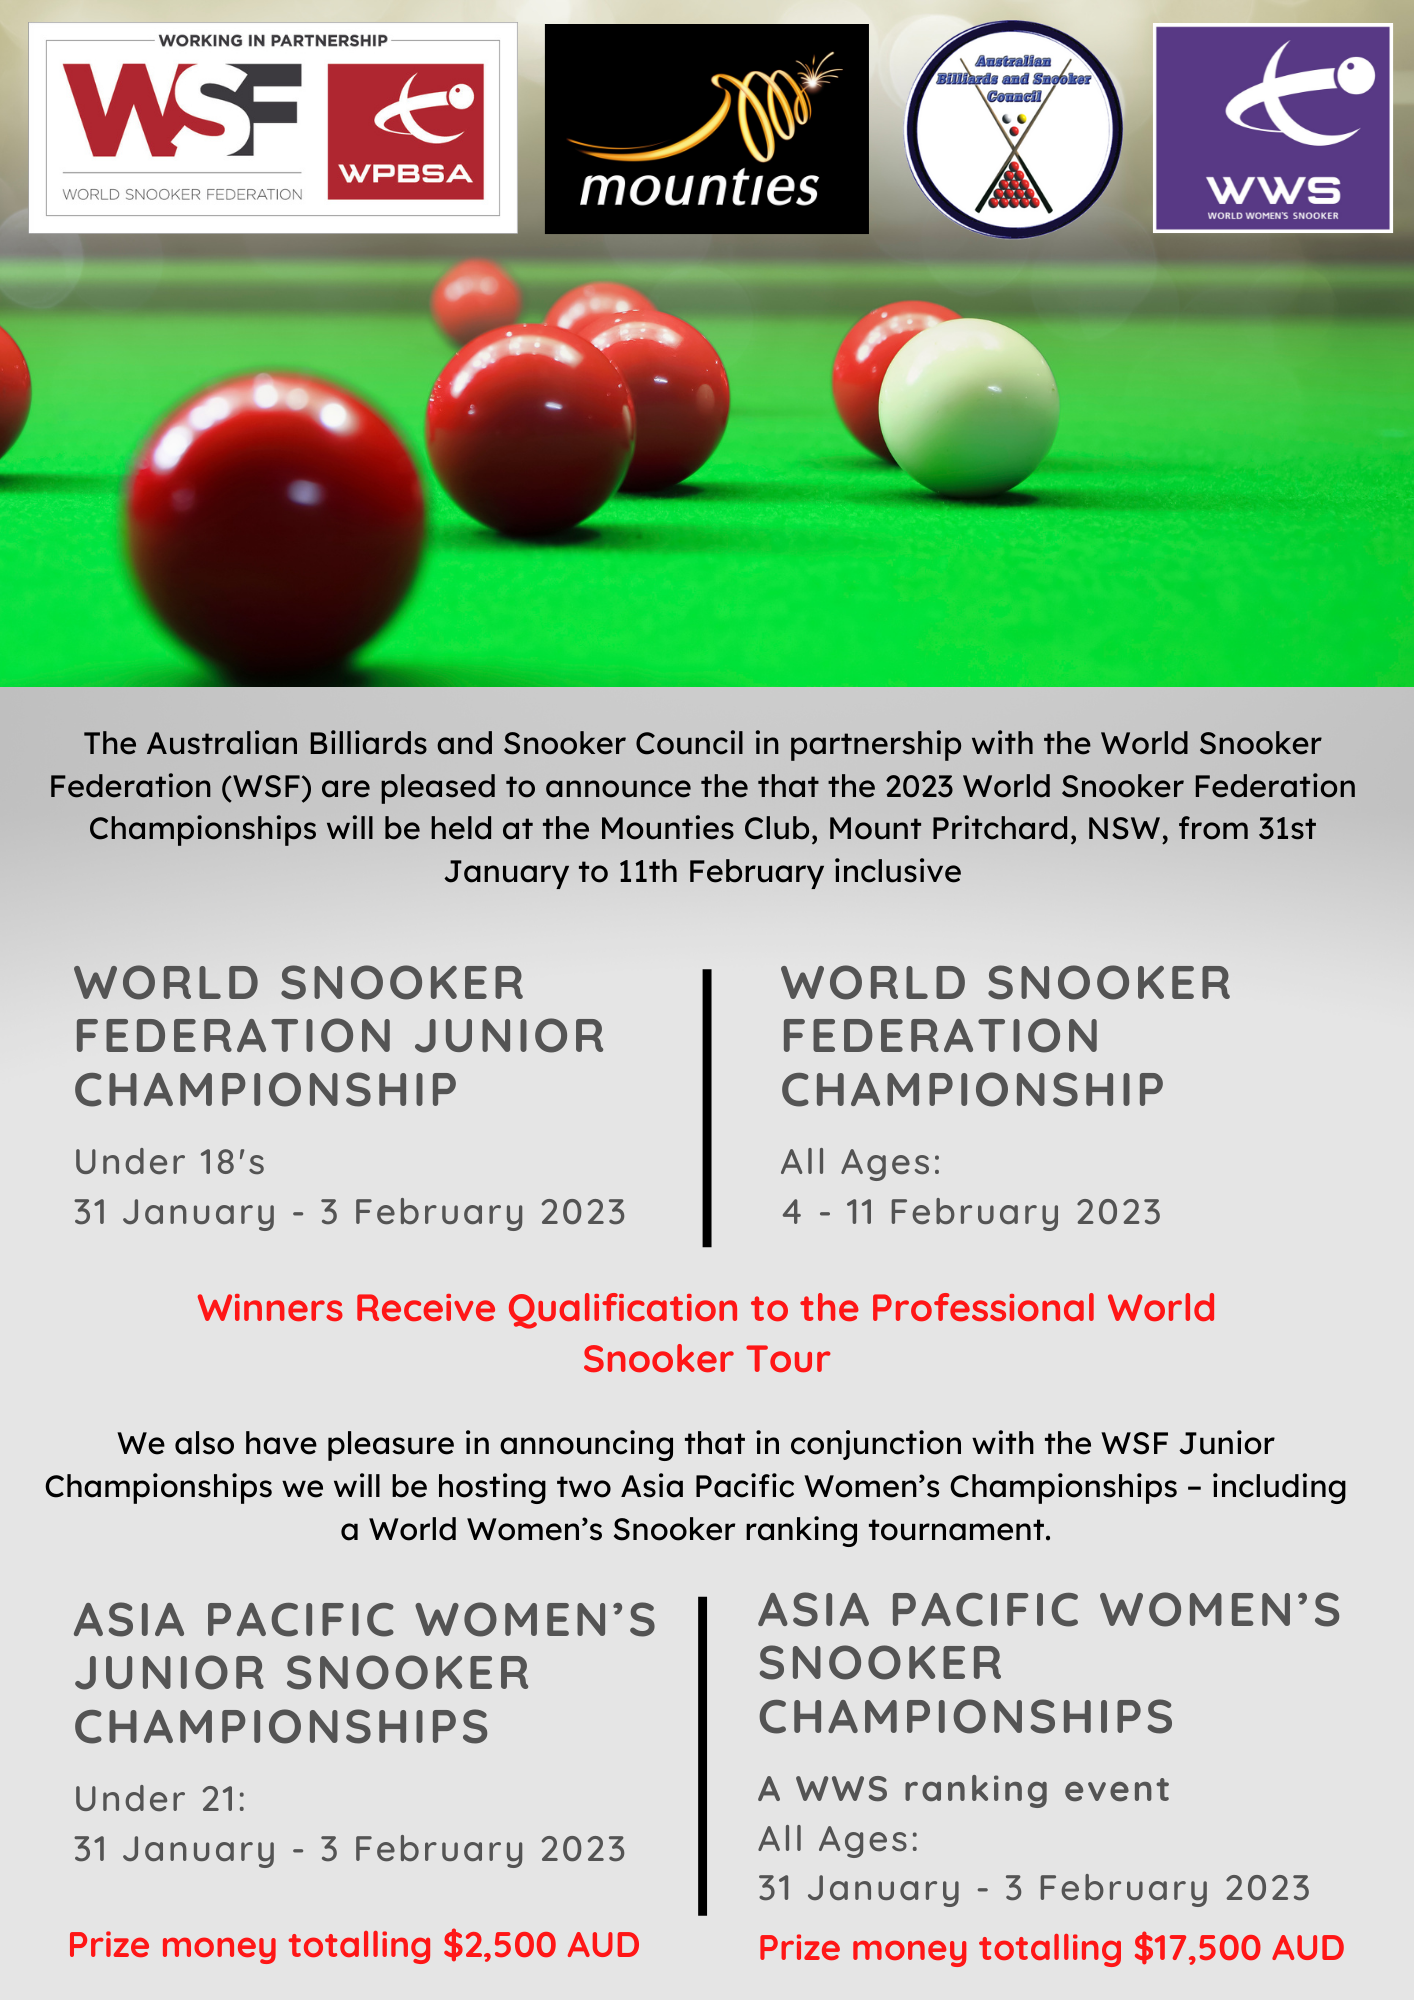 World Snooker Federation Championships — ABSC